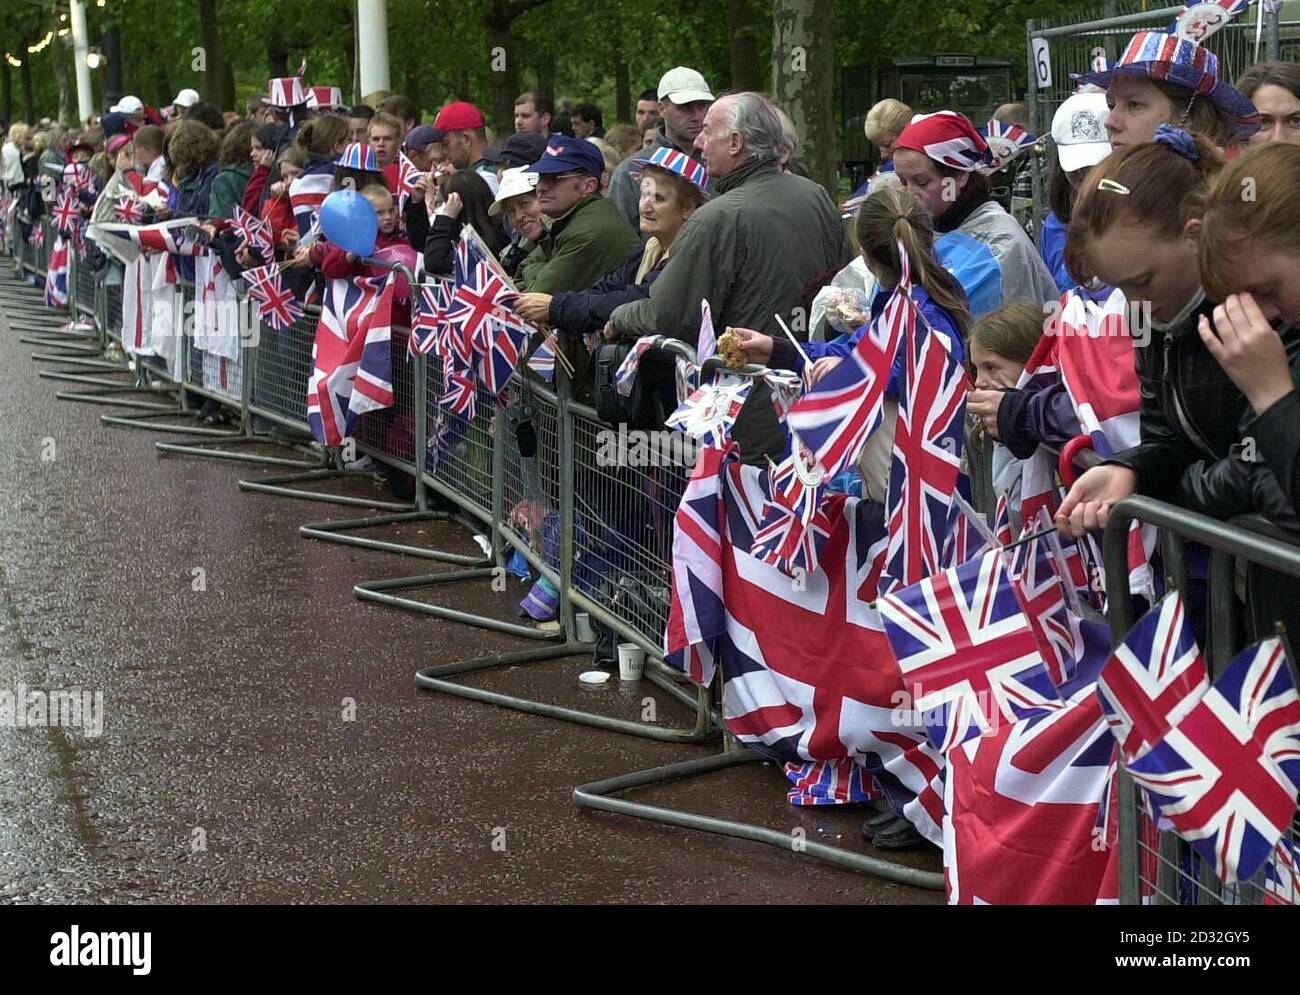 Early morning spectators holding their Union Jack flags waiting to see Britain's Queen Elizabeth II outside Buckingham Palace. The Queen and the Duke of Edinburgh will leave Buckingham Palace in a State Gold Coach for a thanksgiving service at St Paul's Cathedral. * ...  before returning to watch a parade in The Mall on the final day of the Golden Jubilee Bank Holiday weekend. Stock Photo